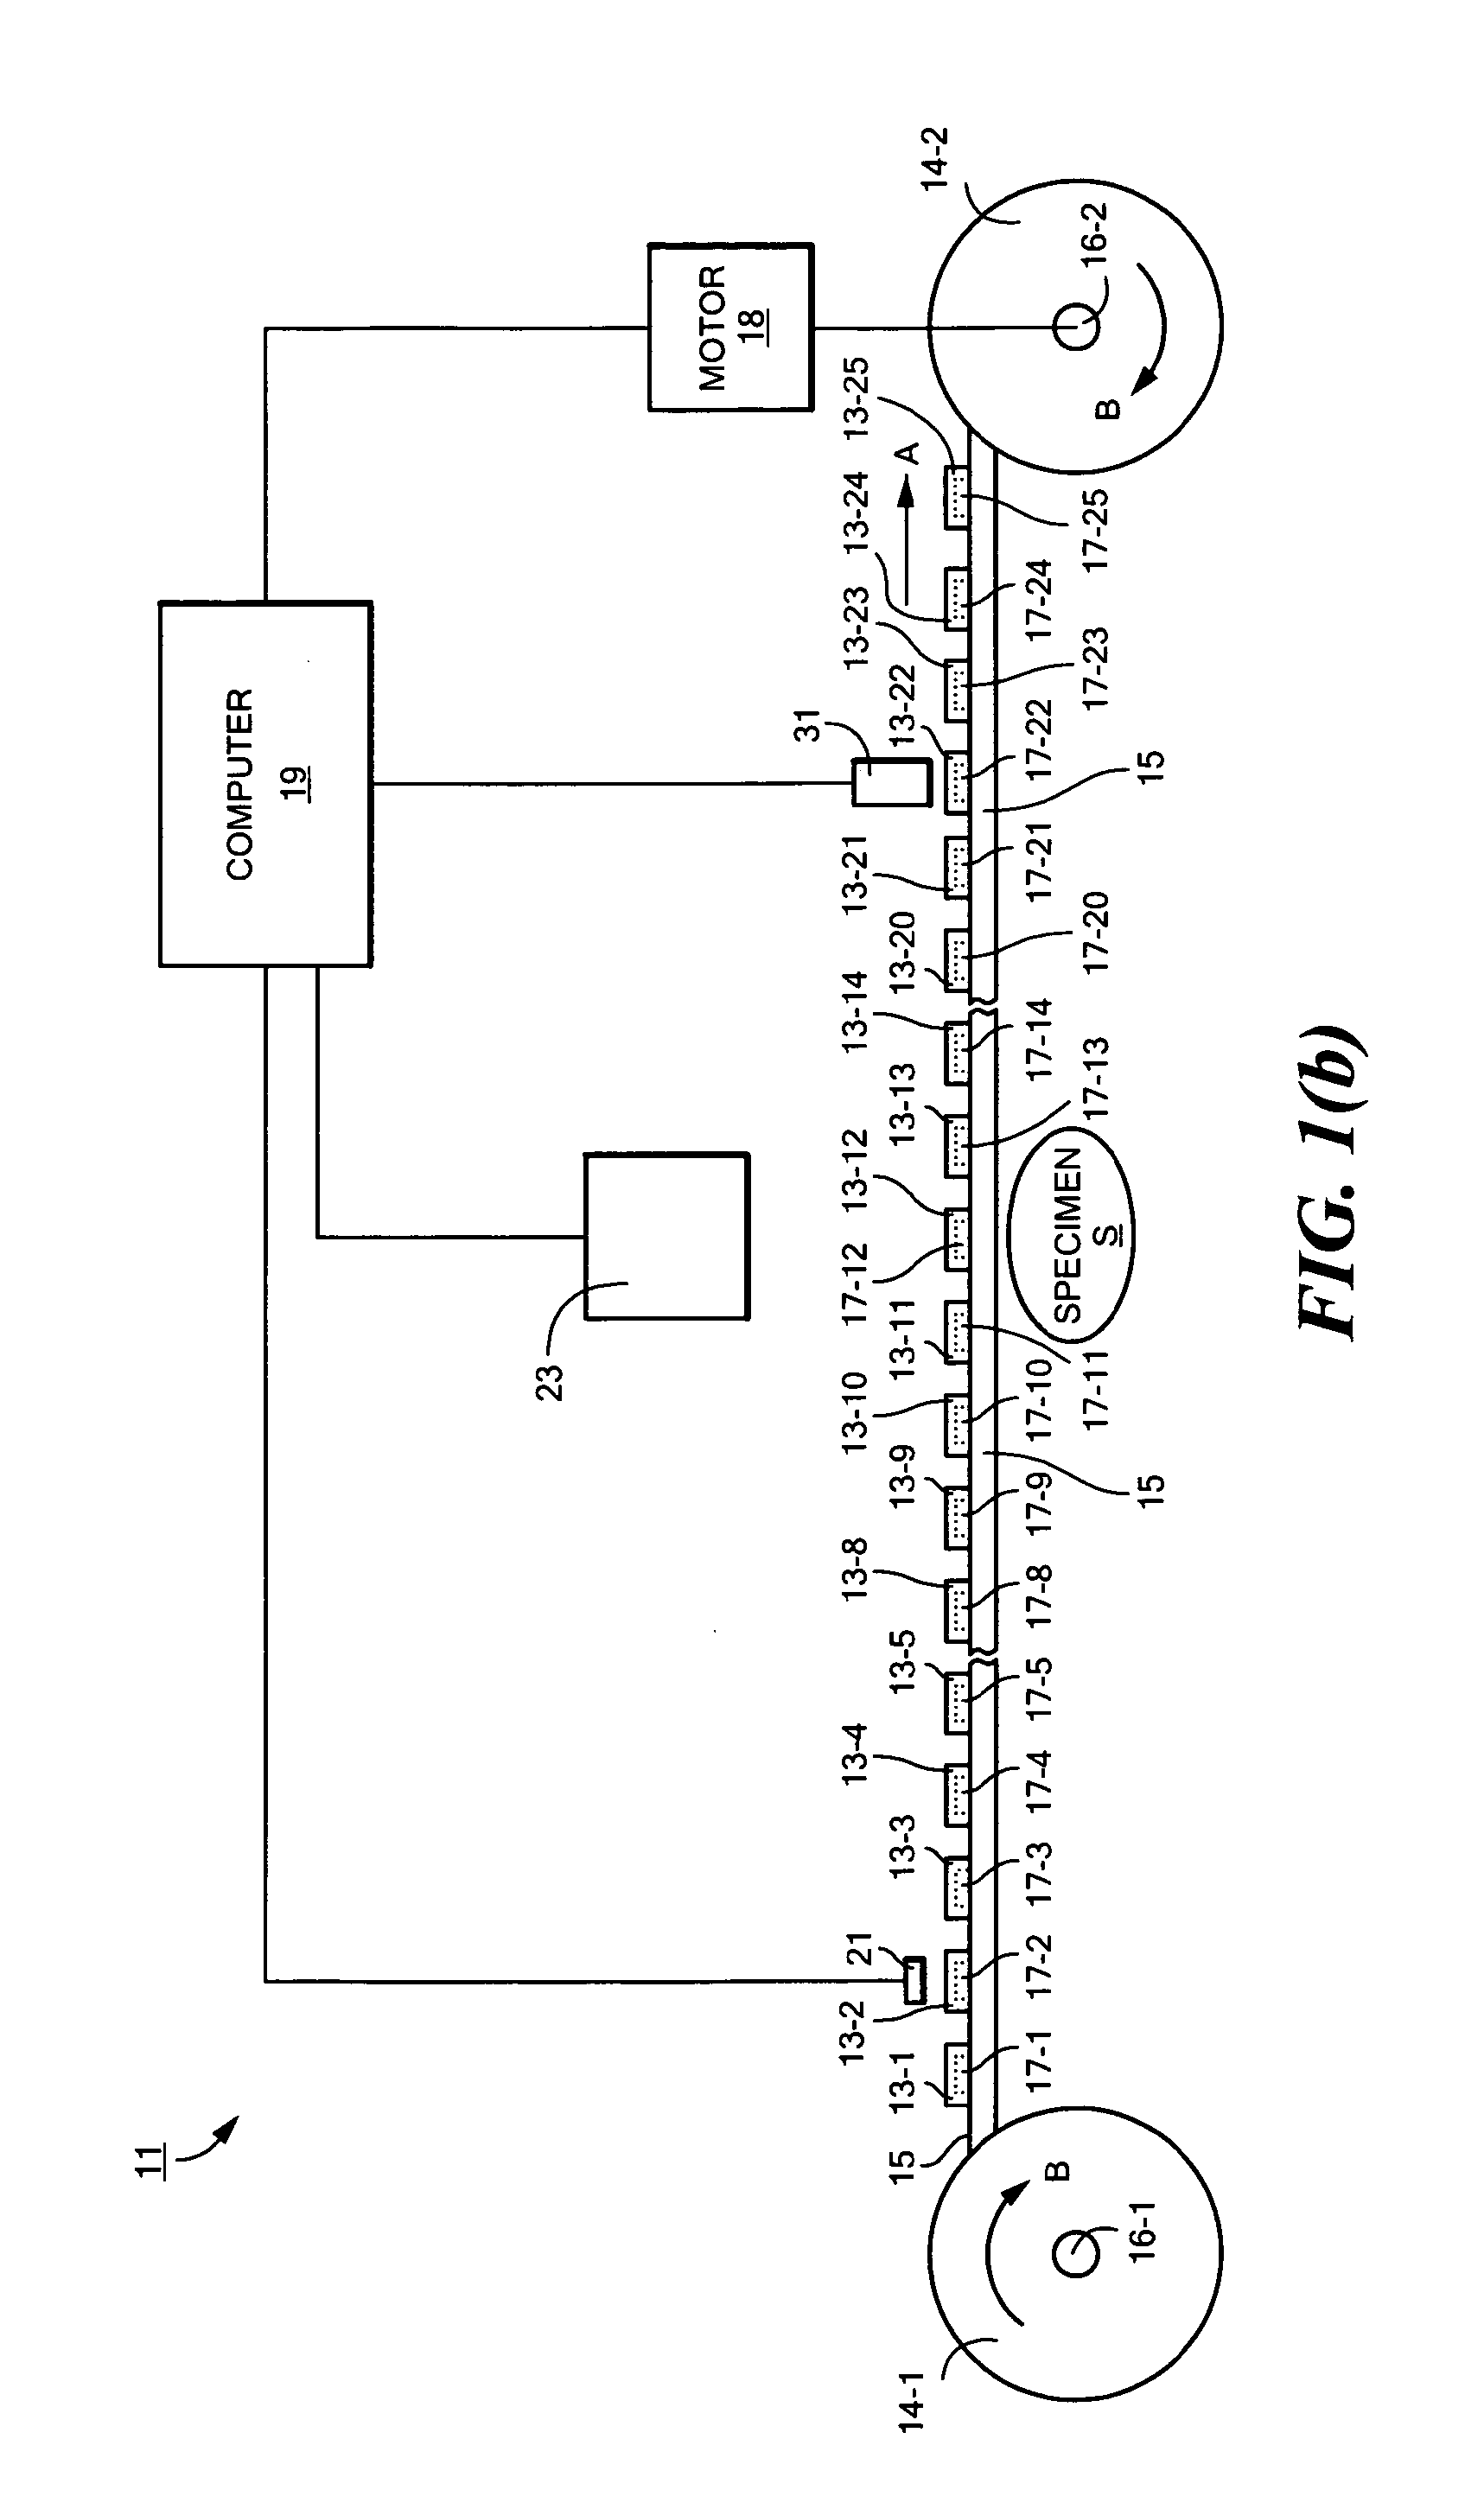 Method and system for testing RFID devices